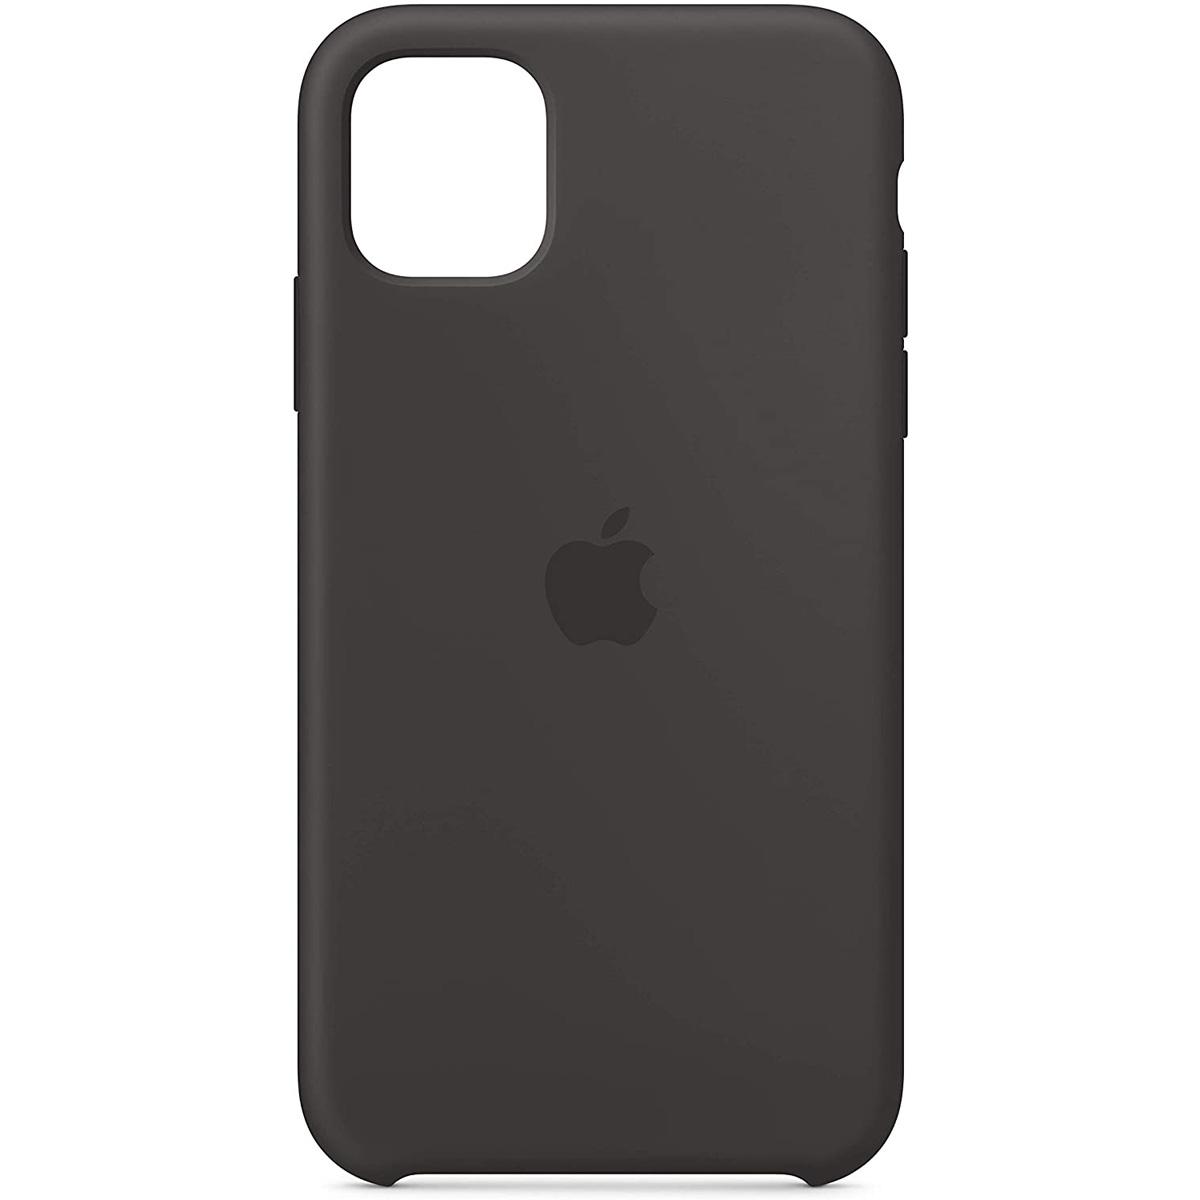 iPhone 11 Apple Silicone Case for $13.99